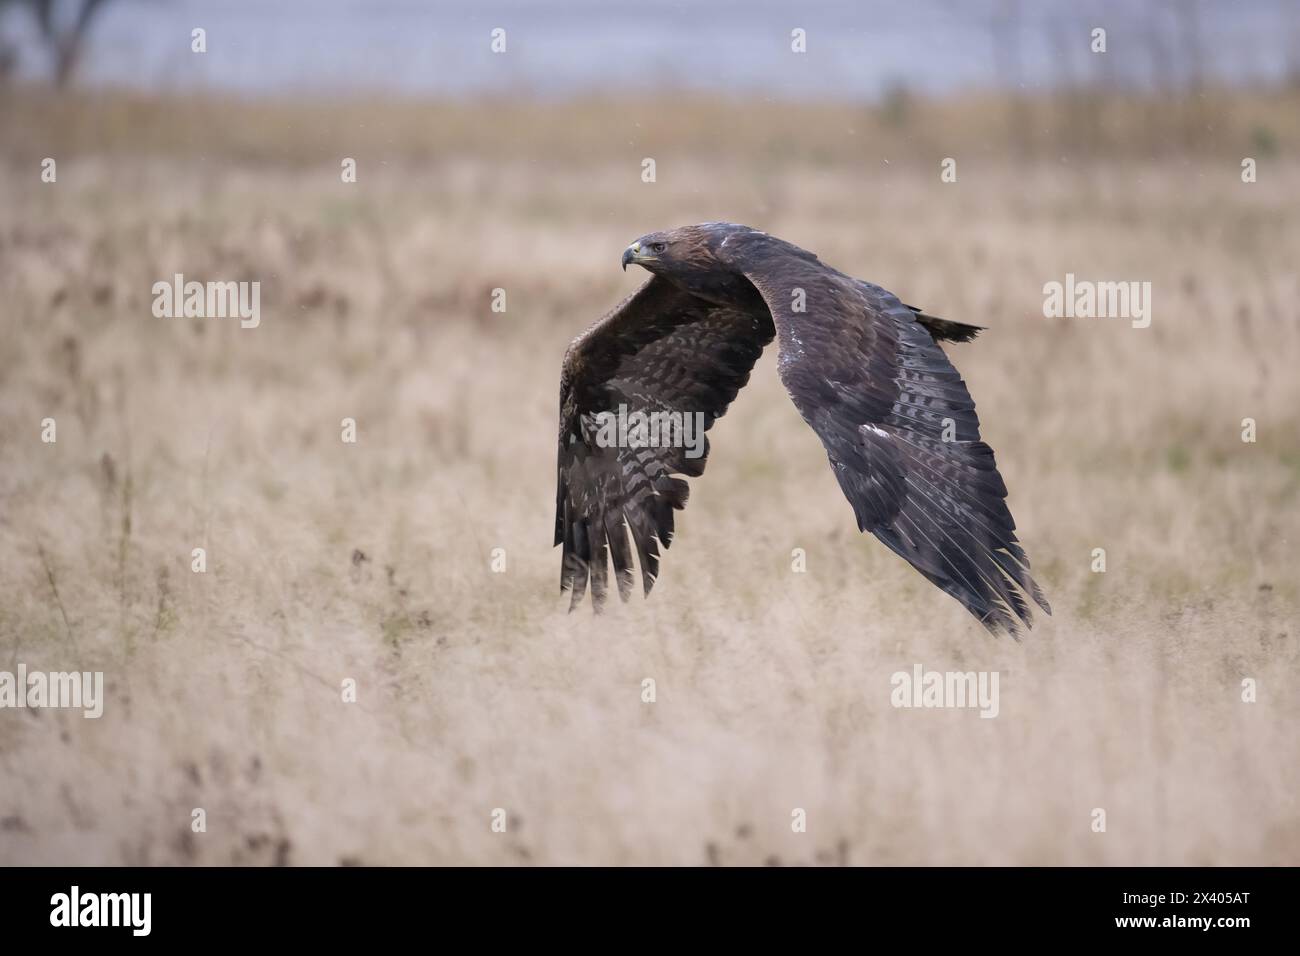 A golden eagle flies low over the ground and prepares to land. Stock Photo